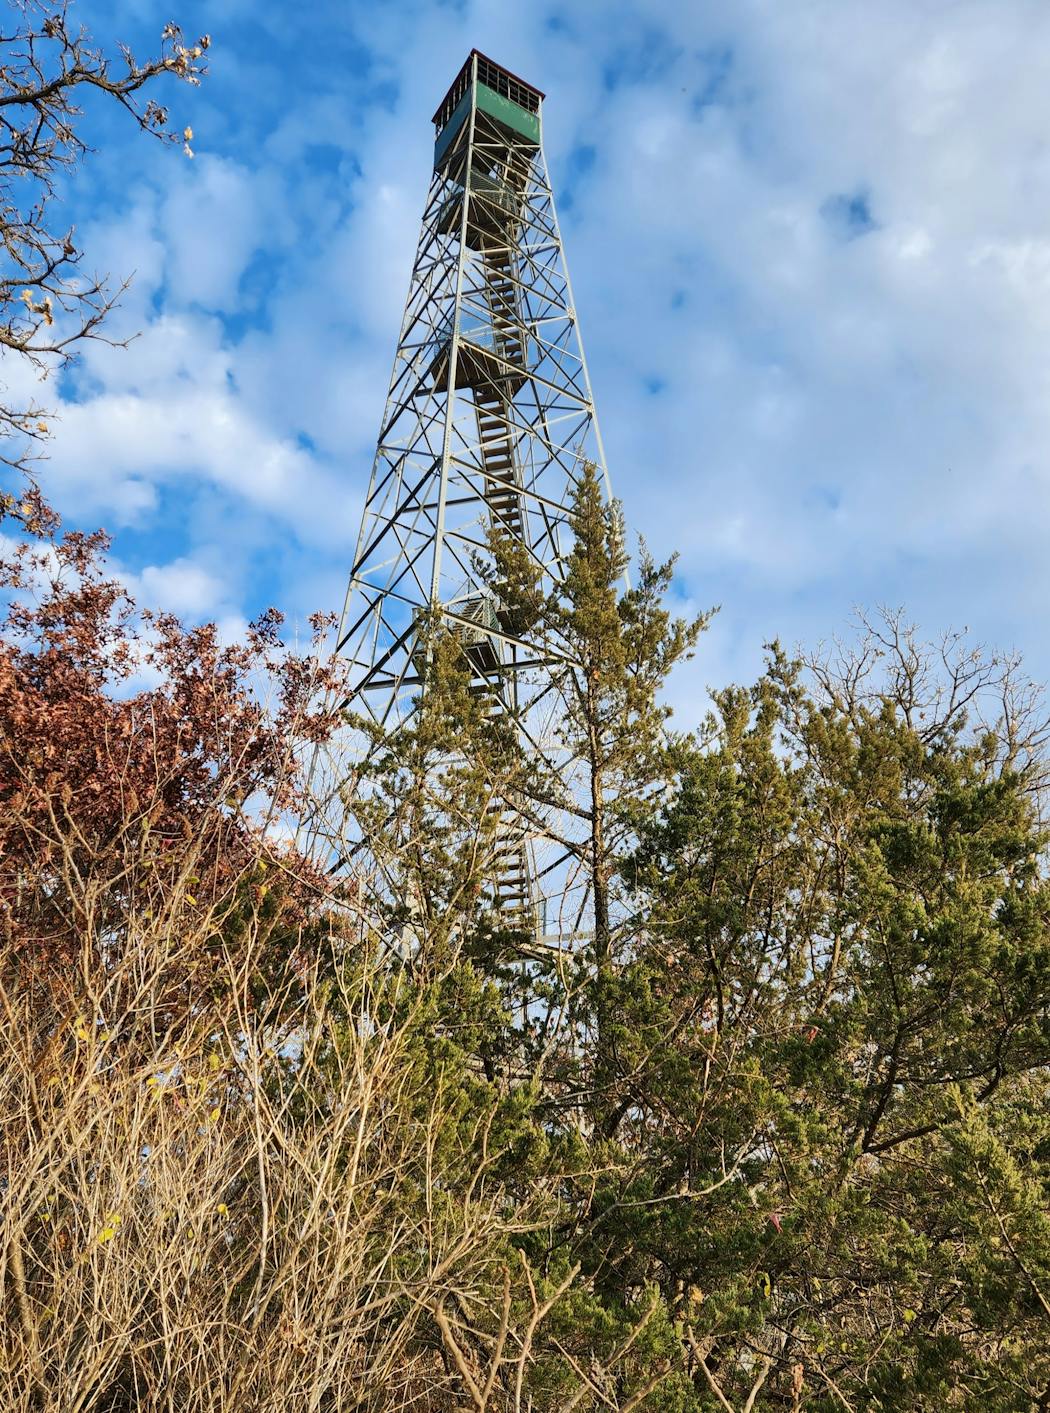 The 100-foot Elba Fire Tower stands at the top of a steep, wooded bluff.